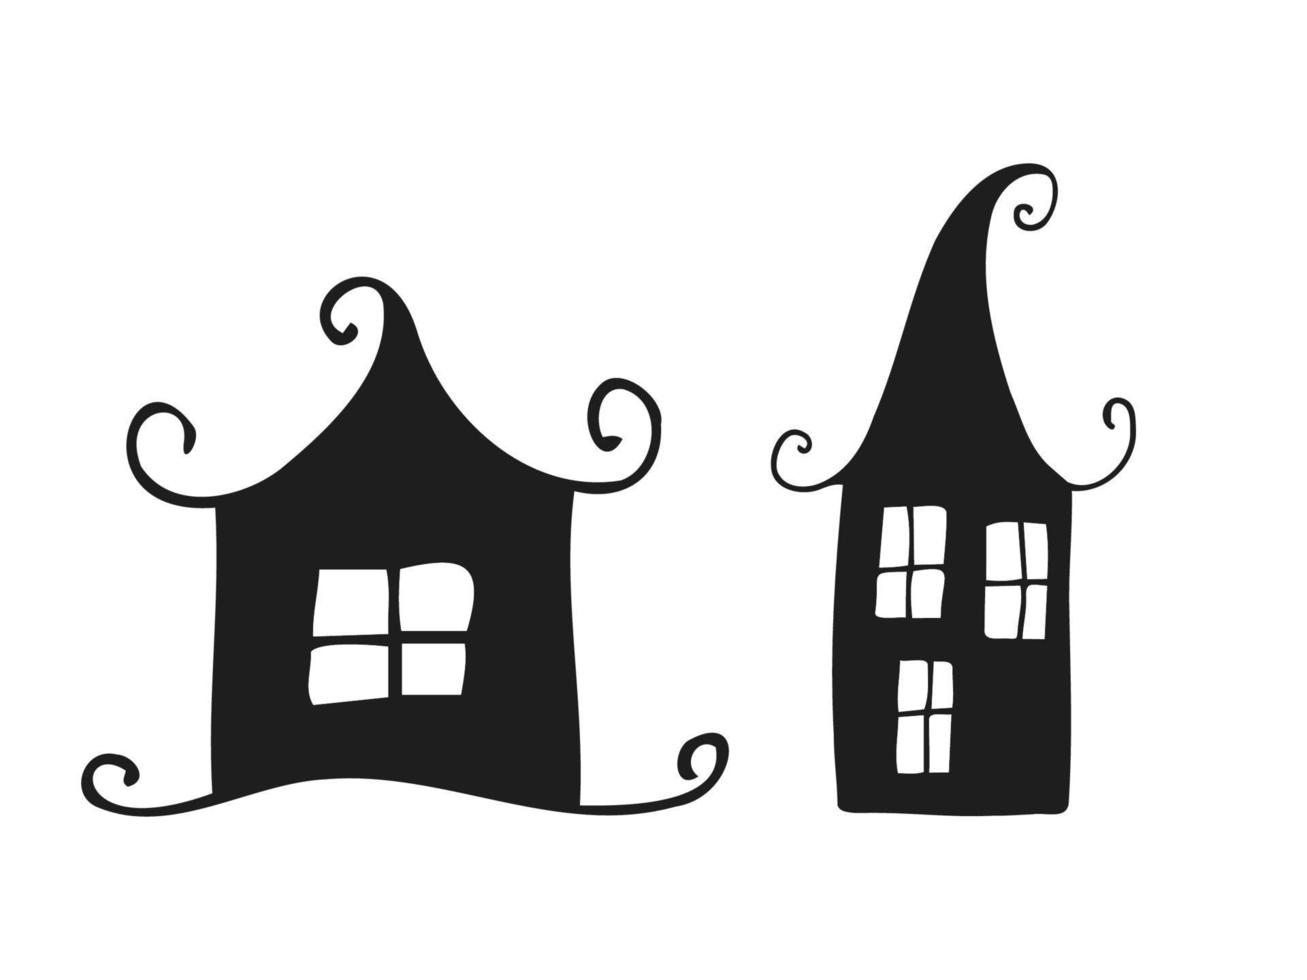 Halloween 2022 - October 31. A traditional holiday. Trick or treat. Vector illustration in hand-drawn doodle style. Set of silhouettes of festive terrible houses.